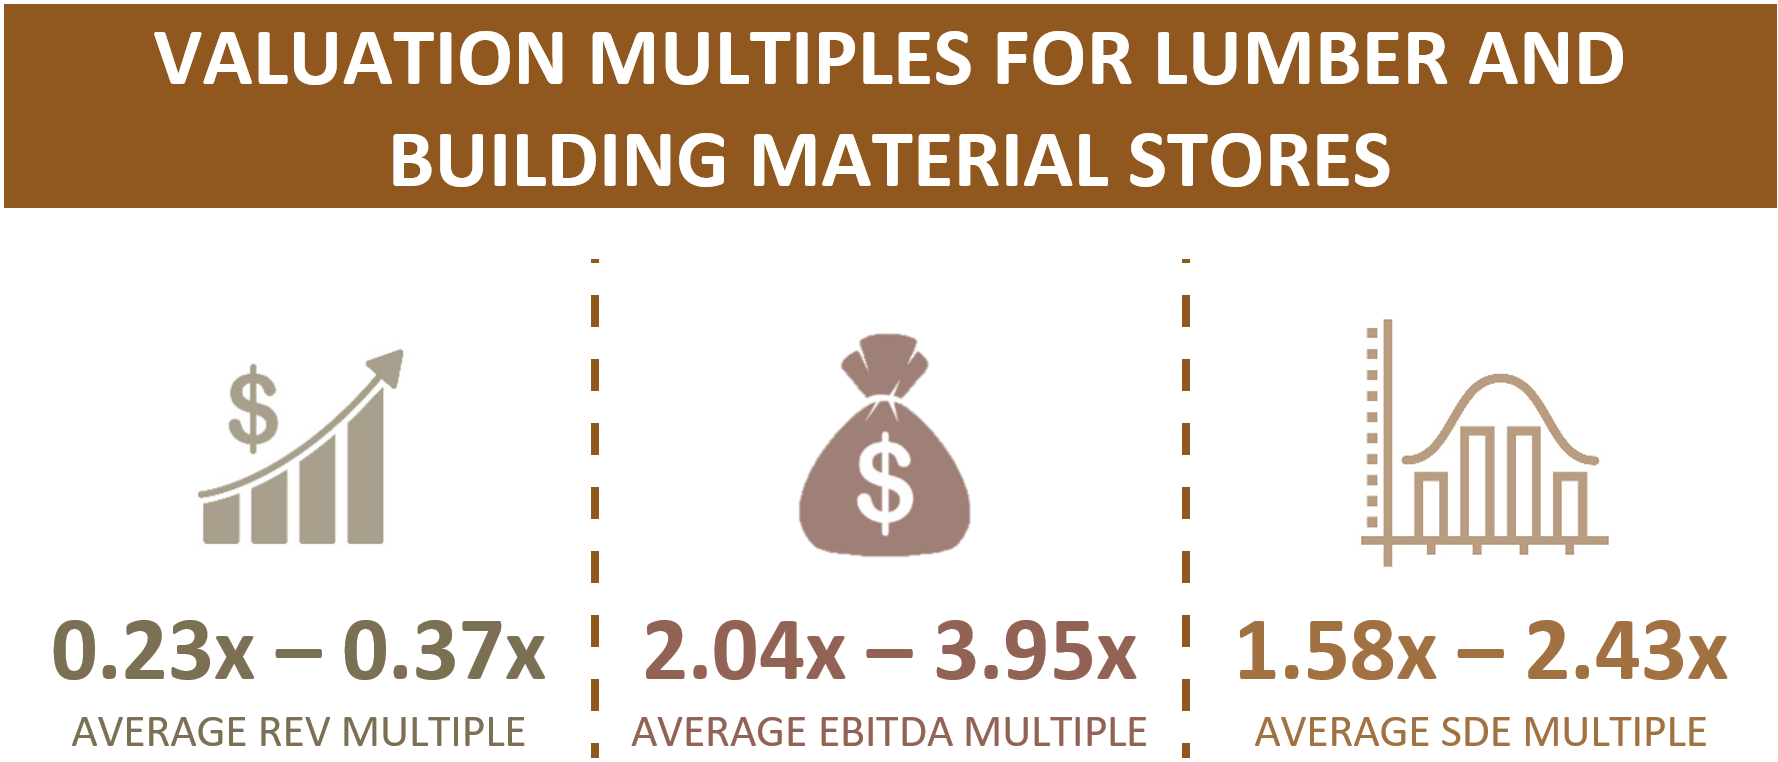 Valuation Multiples For Lumber And Building Material Stores